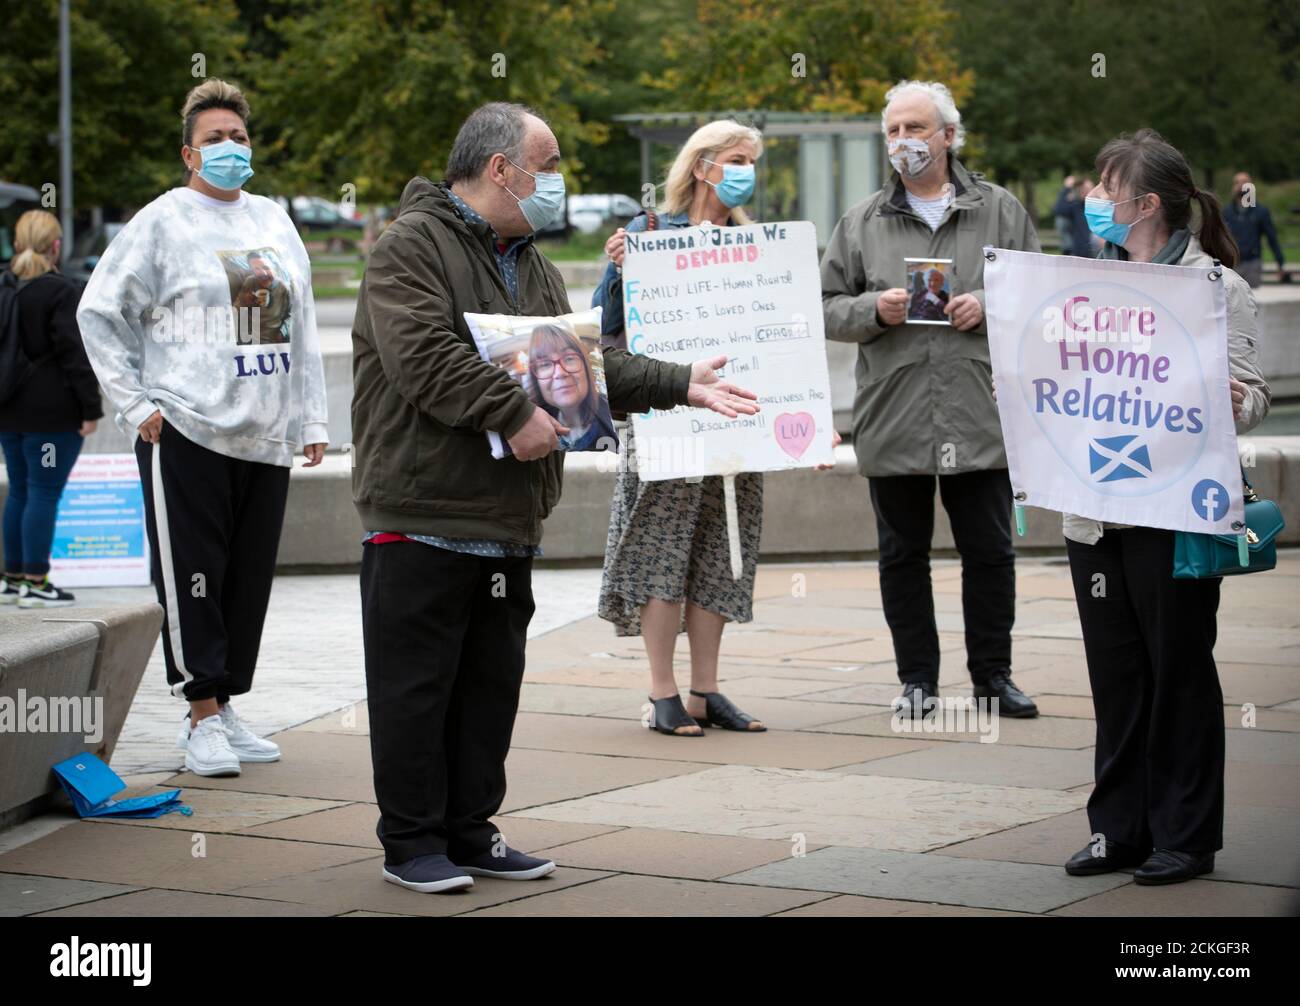 Members of the public take part in a demonstration outside the Scottish Parliament Building in Edinburgh, calling for MSPs to listen to their concerns surrounding care home visiting rules. Stock Photo